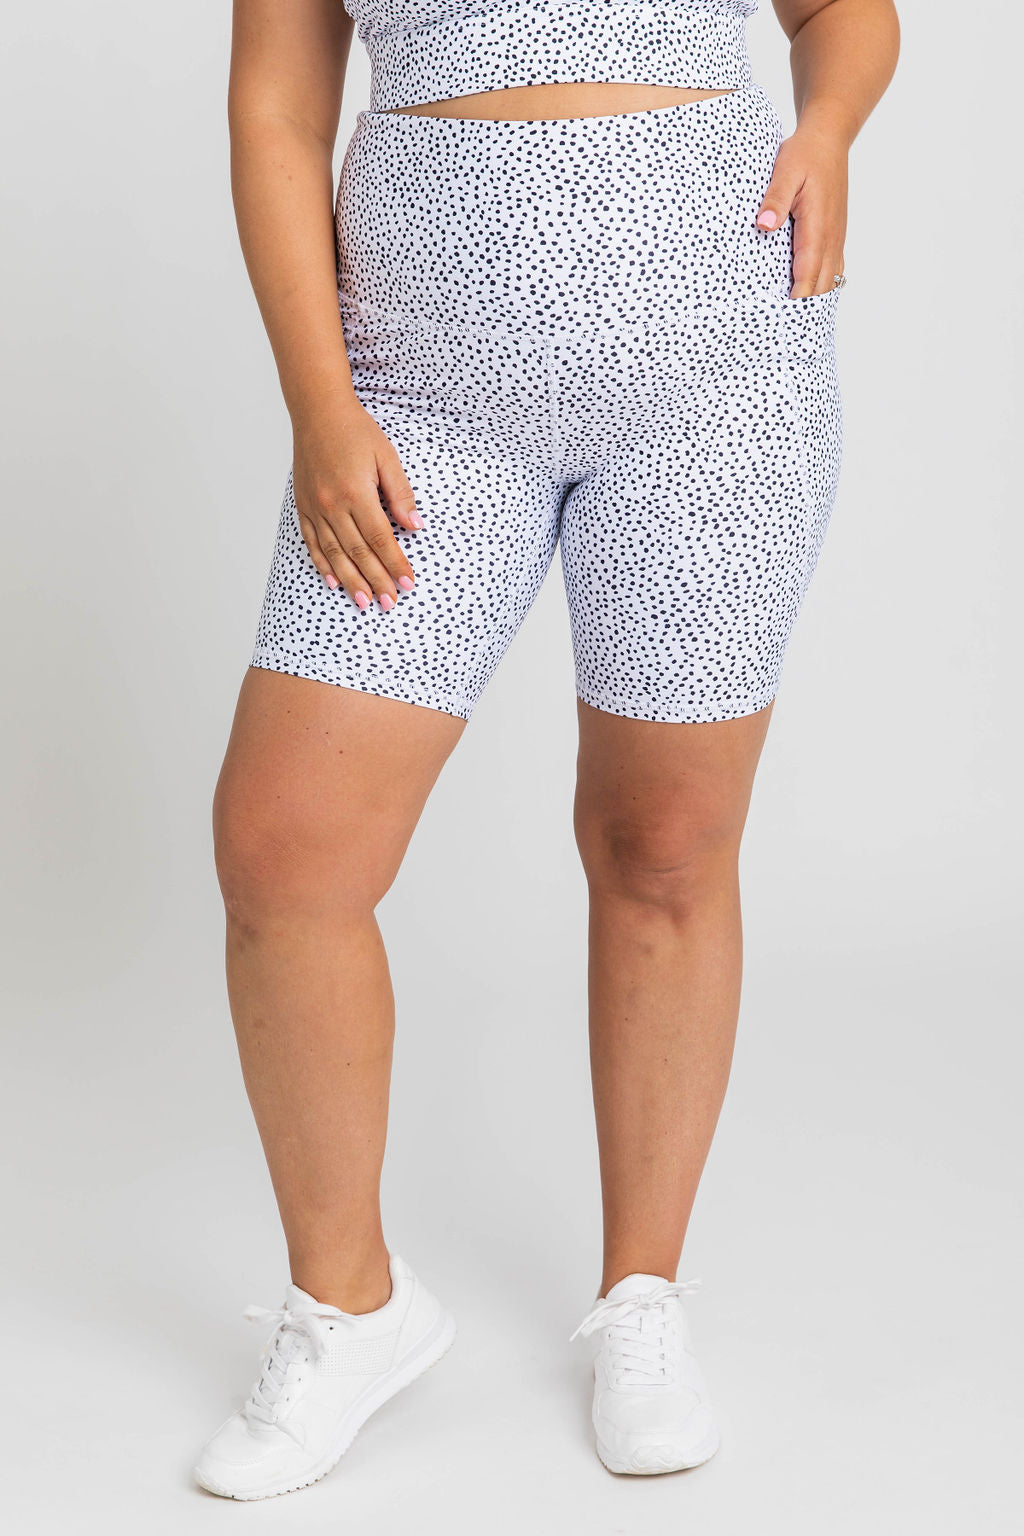 LUXE HIGH RISE SHORT - DOTTY WHITE